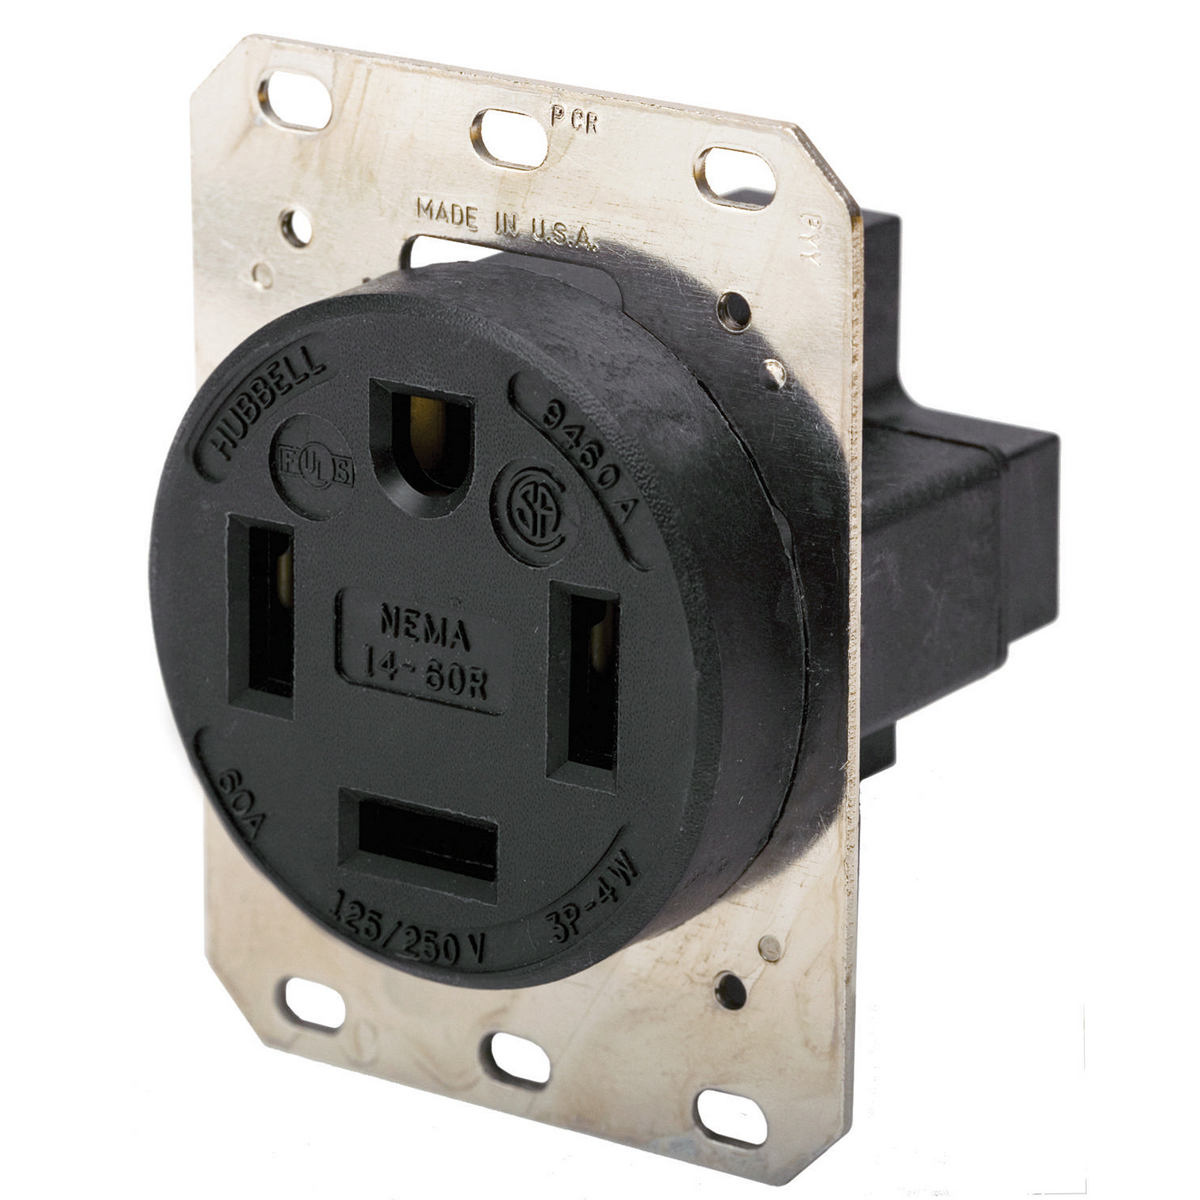 Hubbell Hbl9460a 60 Amp 125 260 Volt 3 Pole 4 Wire Nema 14 60r Black Straight Blade Receptacle Onesource Distributors